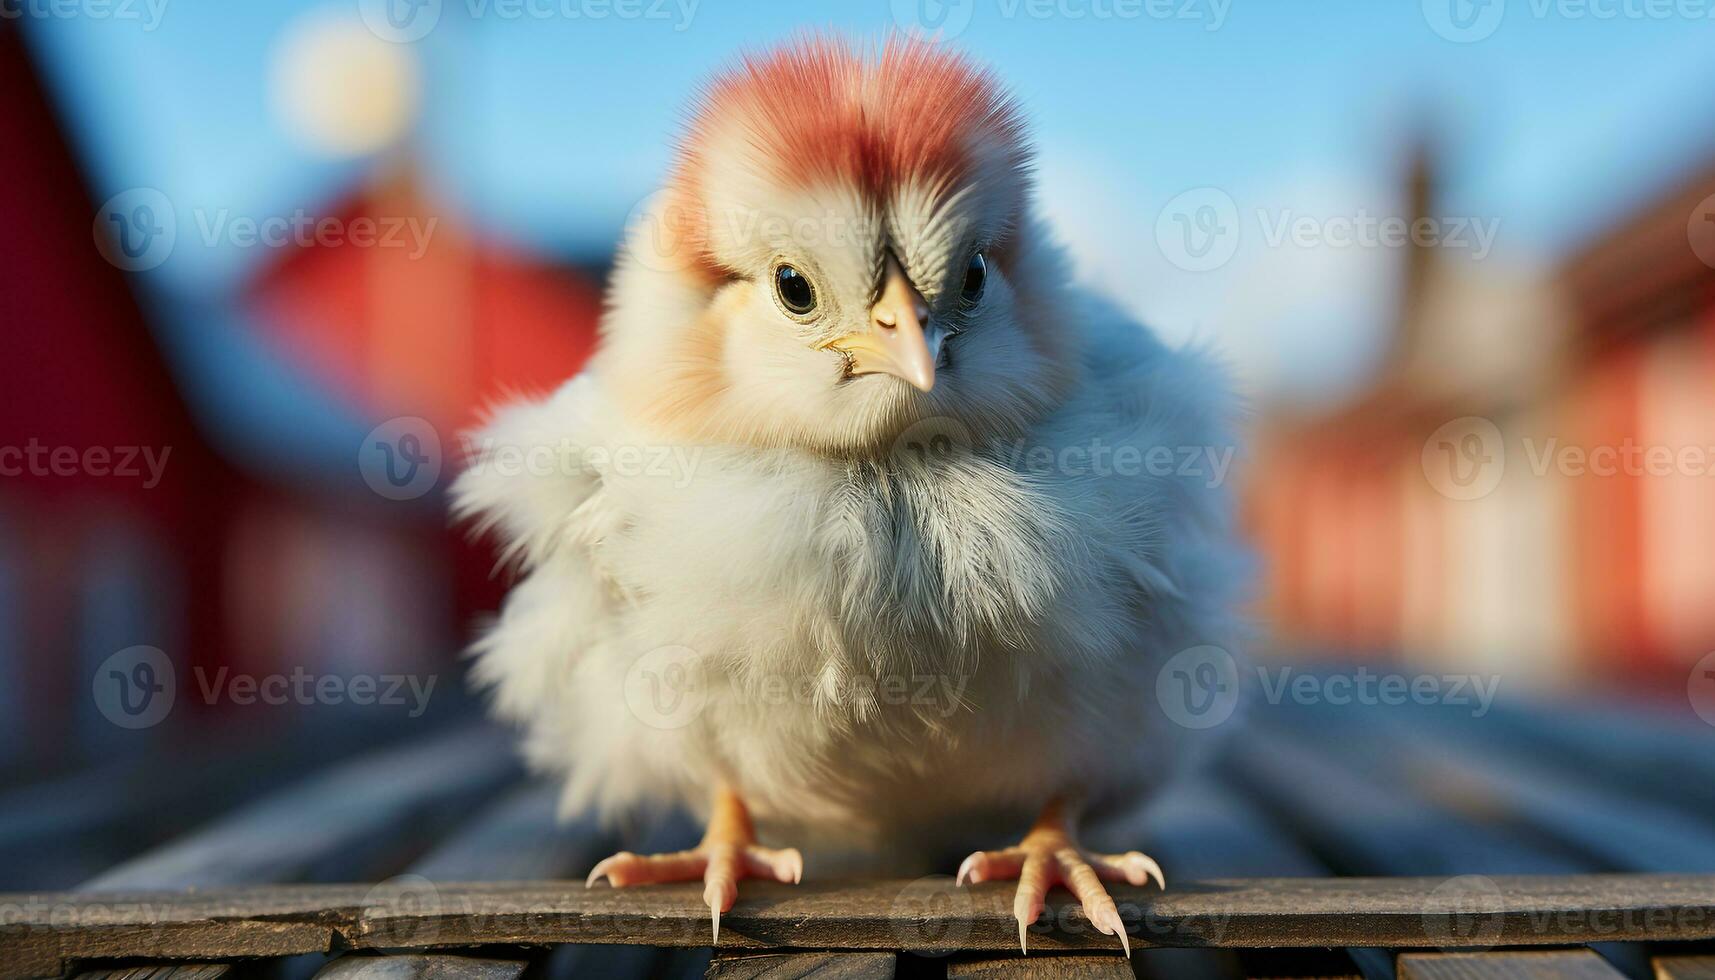 Cute baby chicken with fluffy yellow feathers standing outdoors generated by AI photo